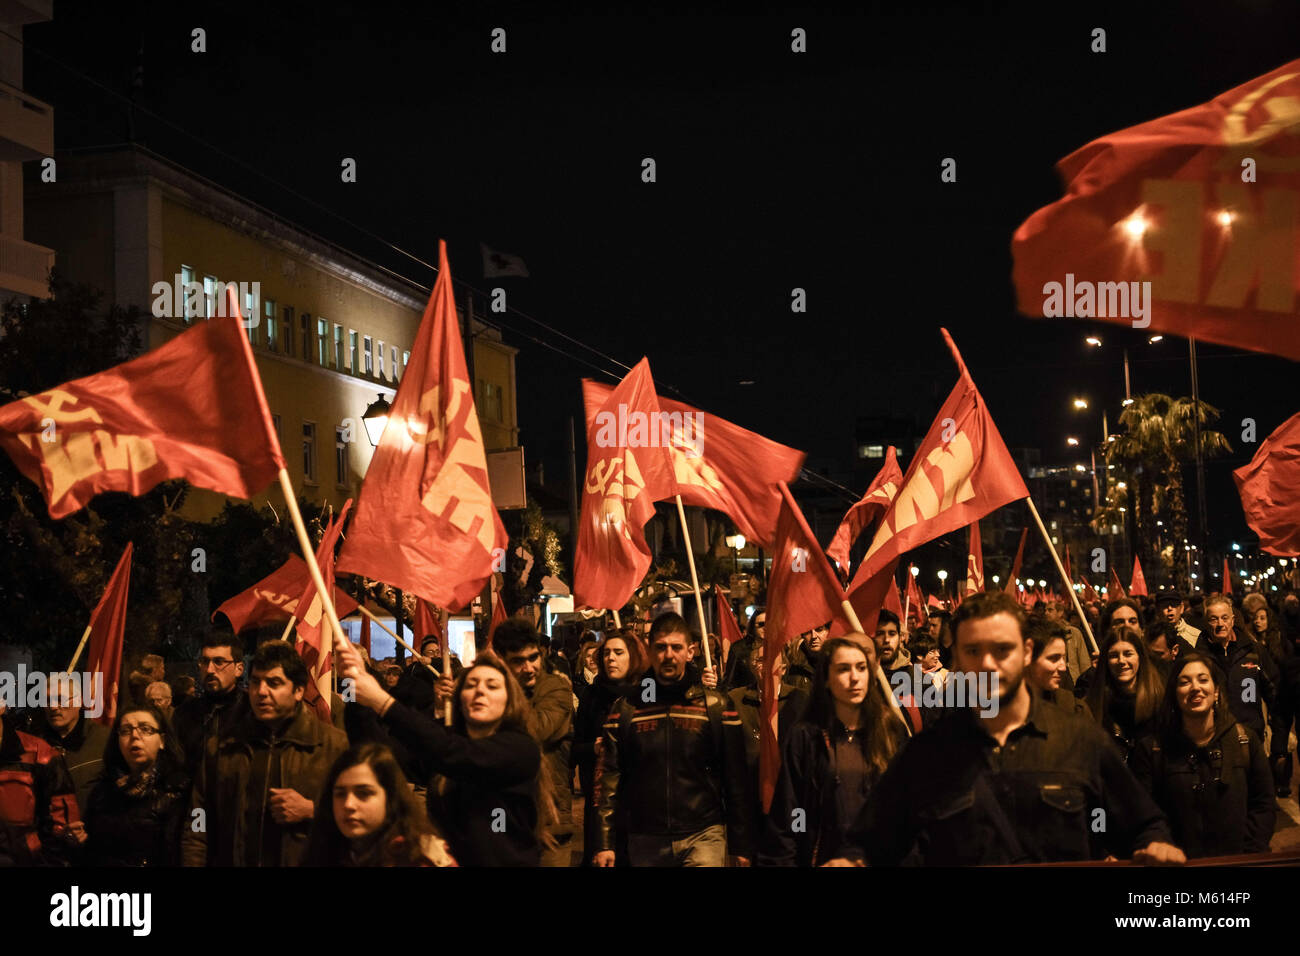 Athens, Greece. 27th Feb, 2018. People holding flags during the demonstration.Demonstration at Syntagma Square in Athens as general secretary of the Communist Party of Greece delivers a speech on developments in the Balkans, the Middle East and the Greek-Turkish relations. Credit: N Kokovlis 27.2.2018 12 .jpg/SOPA Images/ZUMA Wire/Alamy Live News Stock Photo